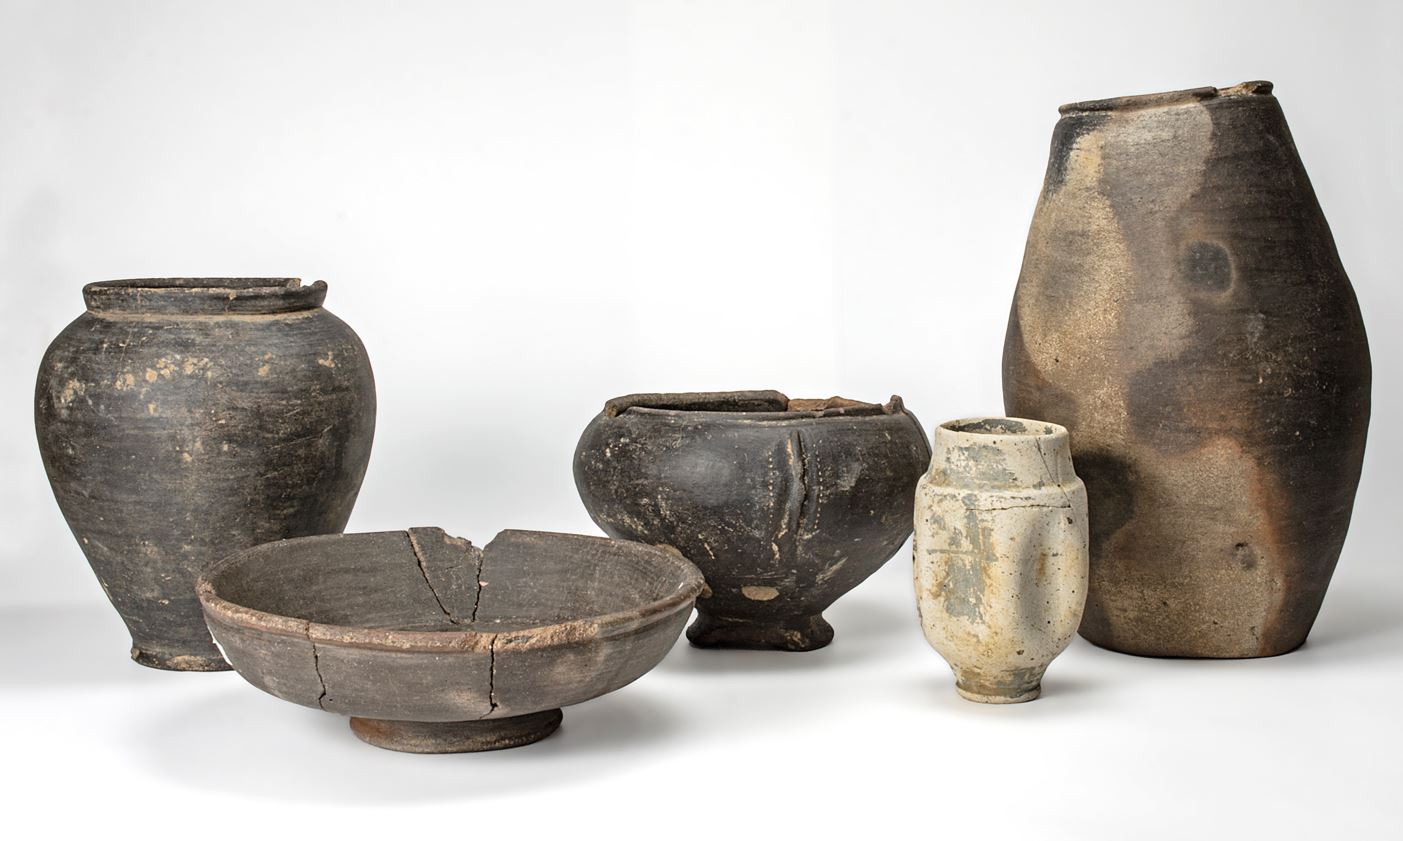 Late Iron Age and Roman pottery